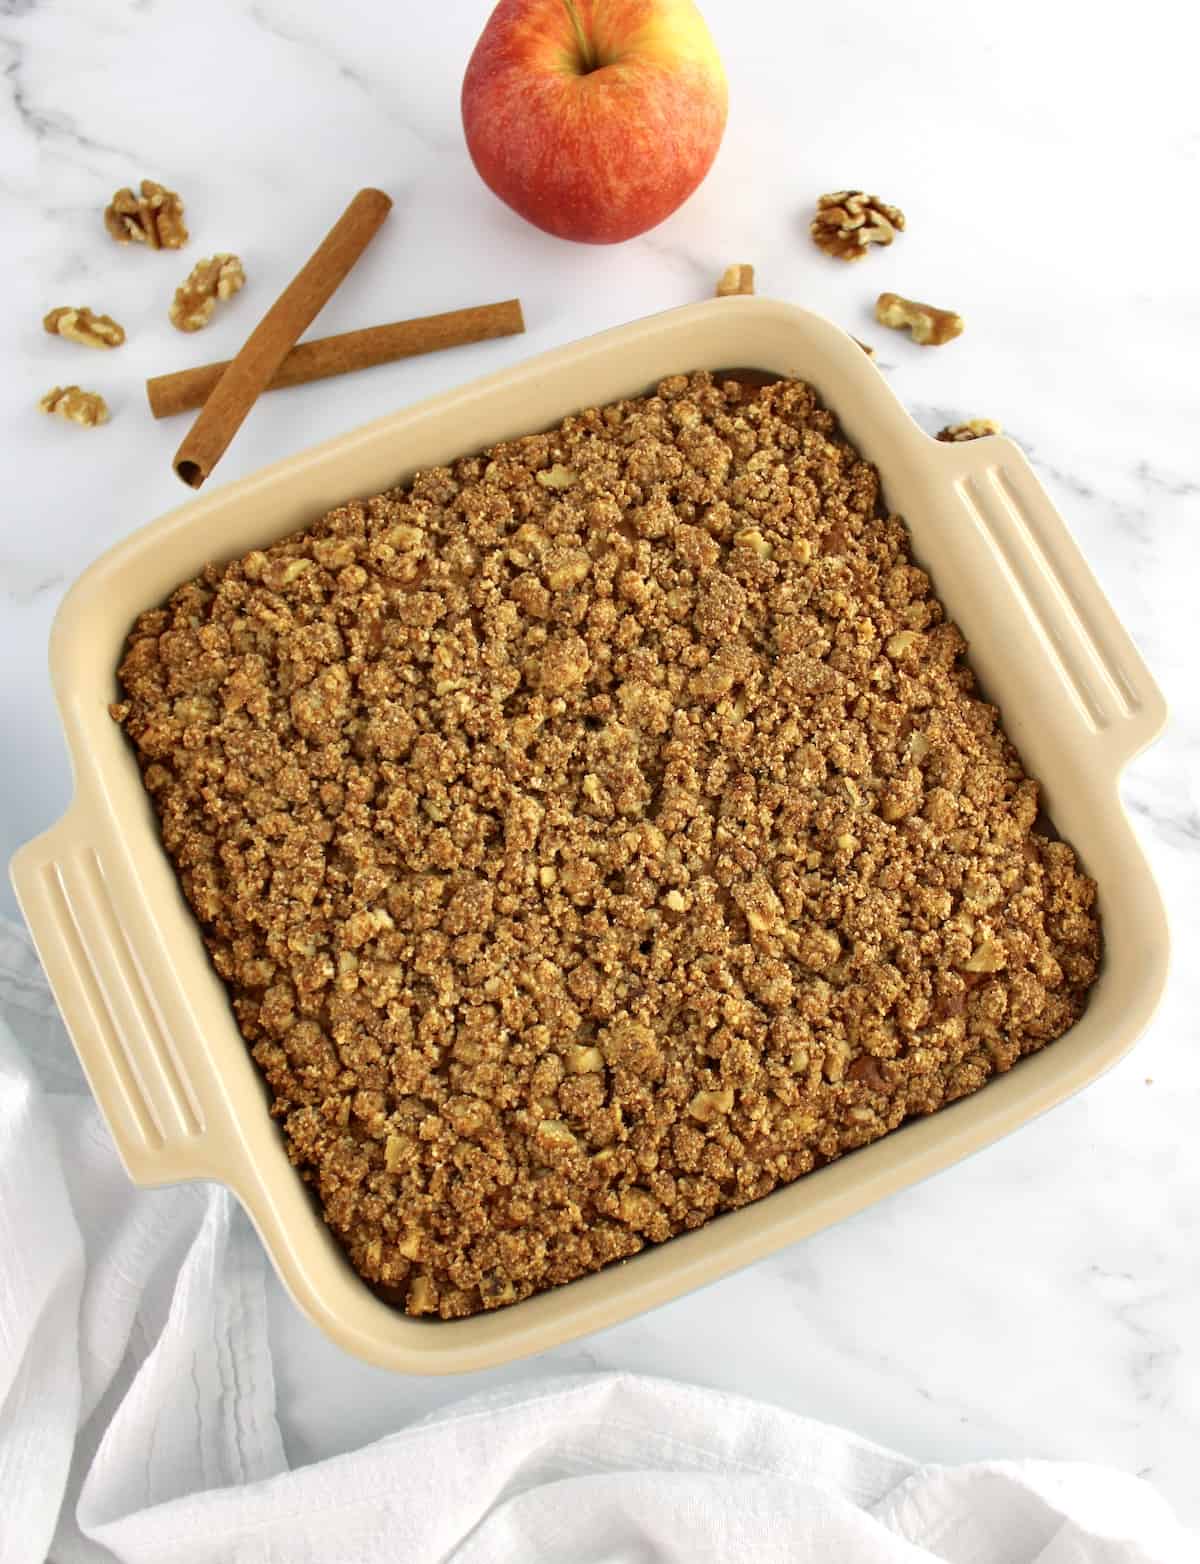 Gluten-Free Apple Cake in baking dish with apple and cinnamon stick in background